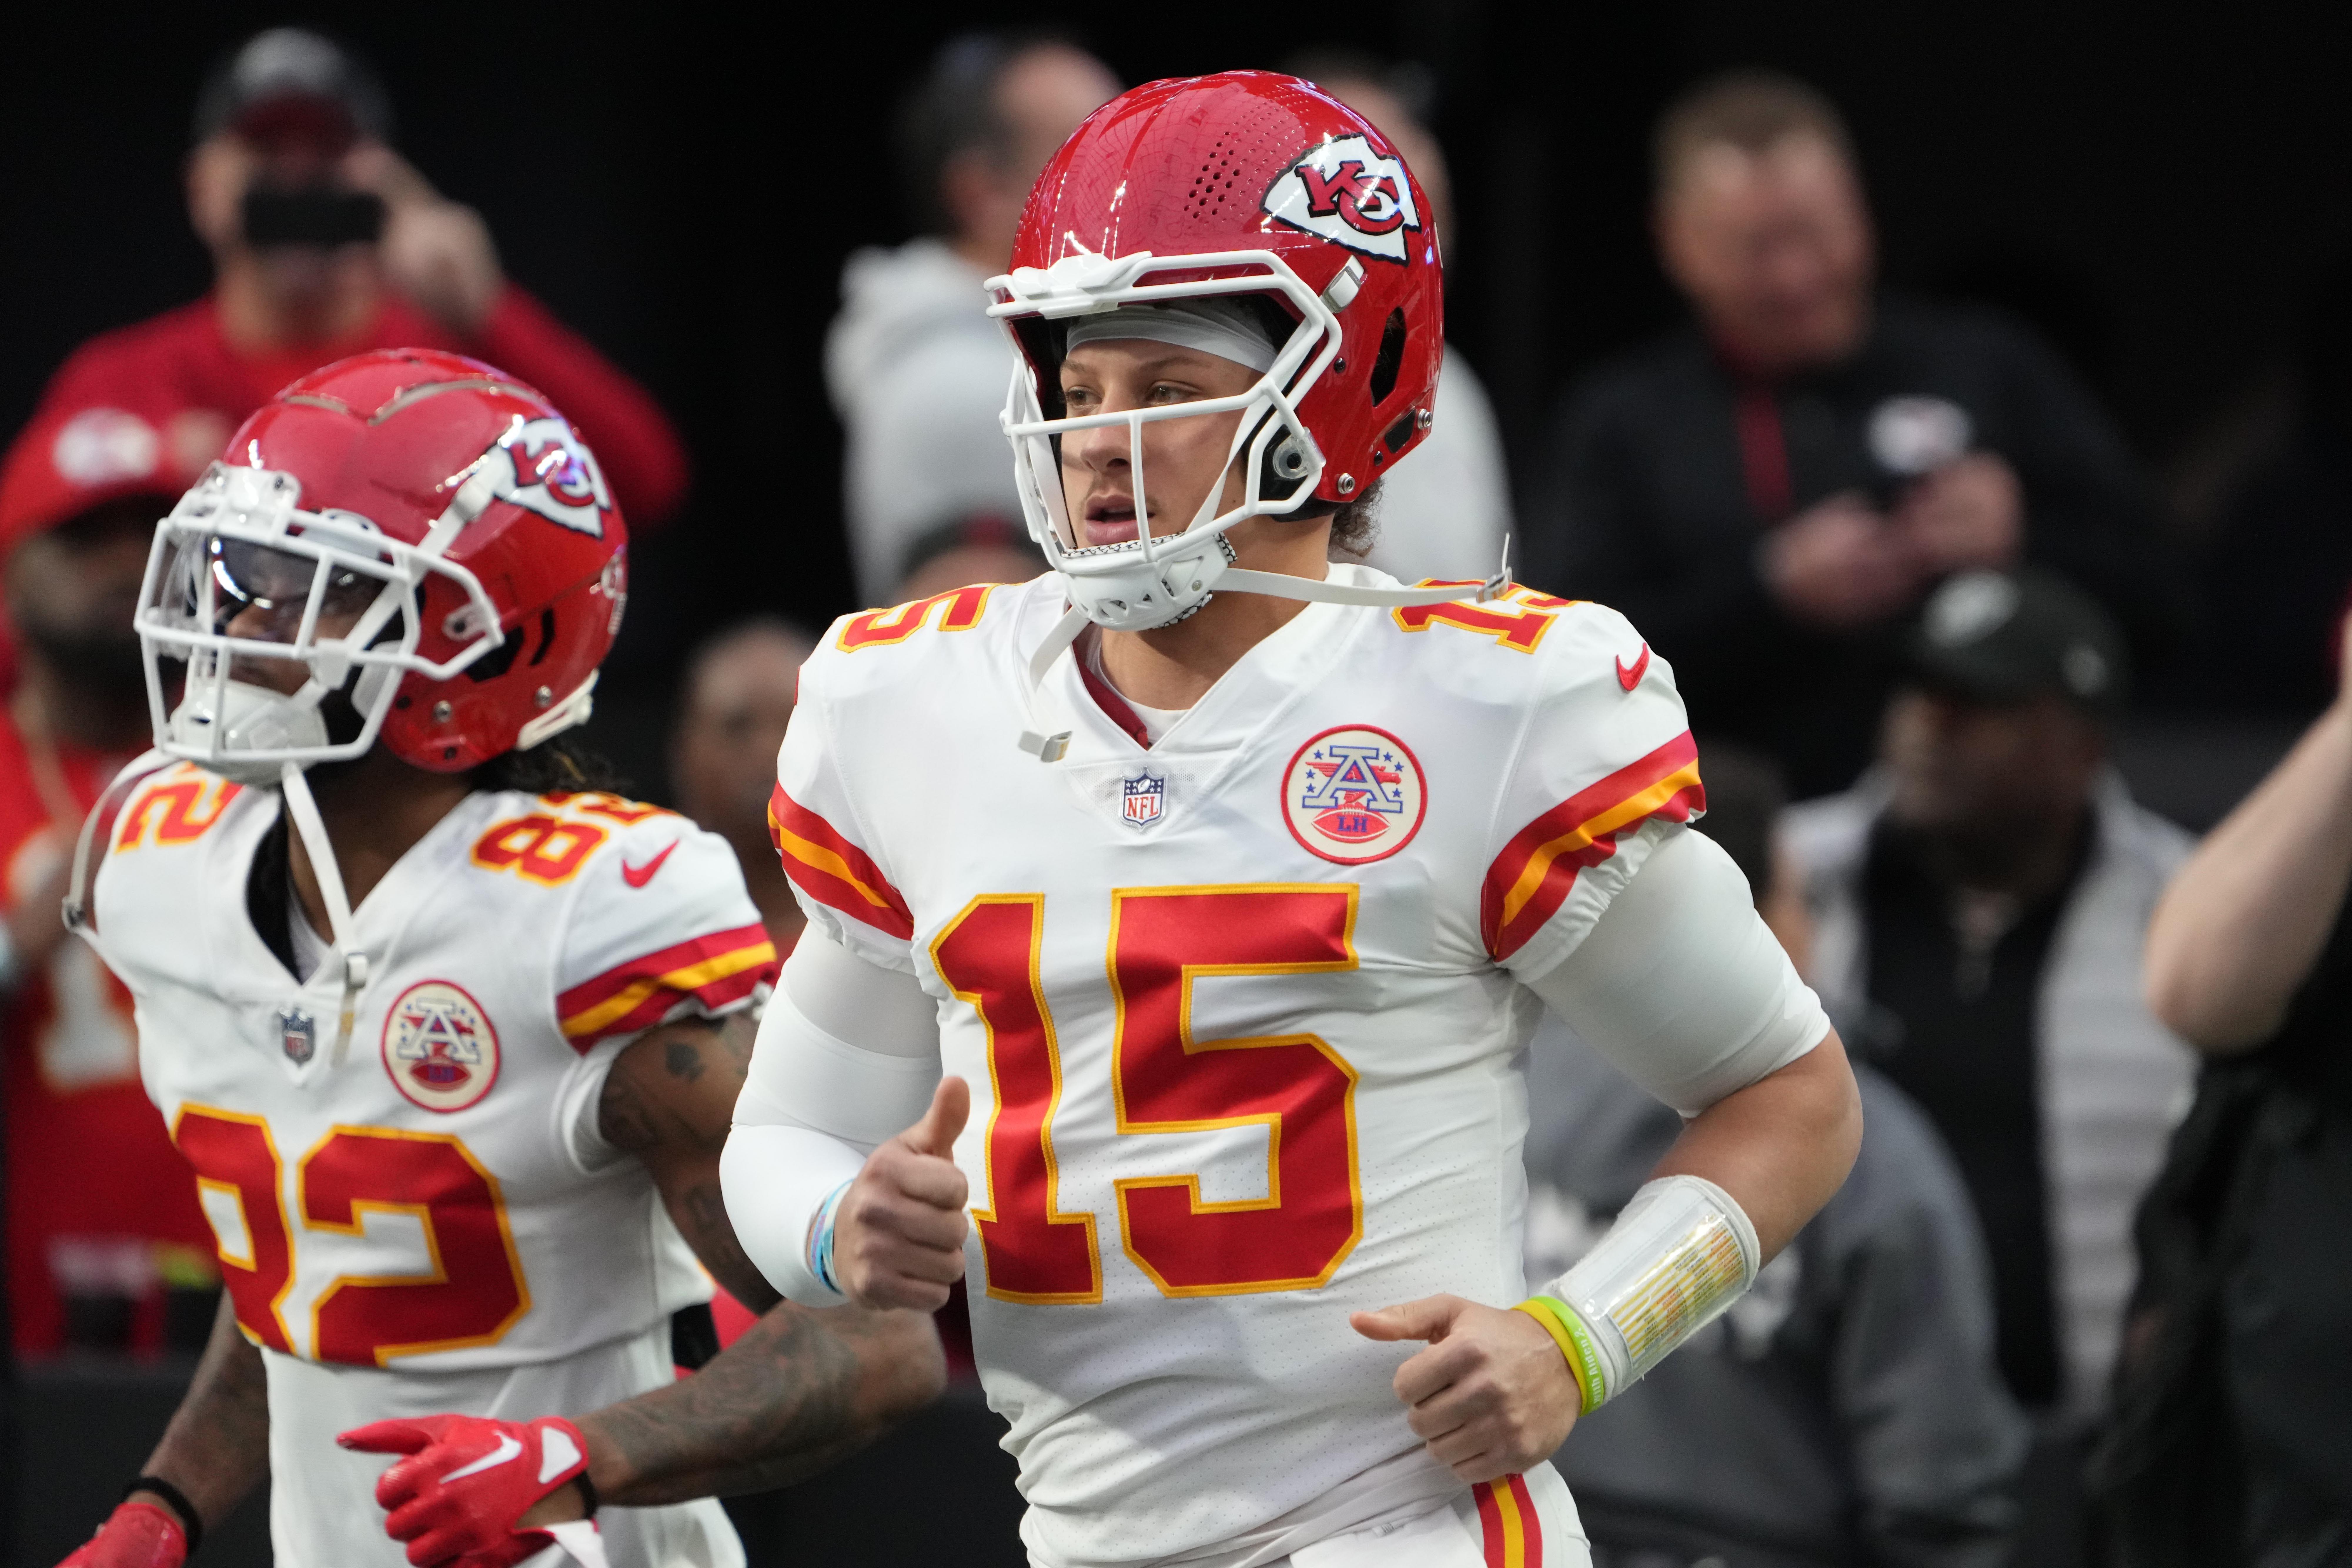 Patrick Mahomes, Travis Kelce and the Chiefs will visit Lambeau Field on Dec. 3.